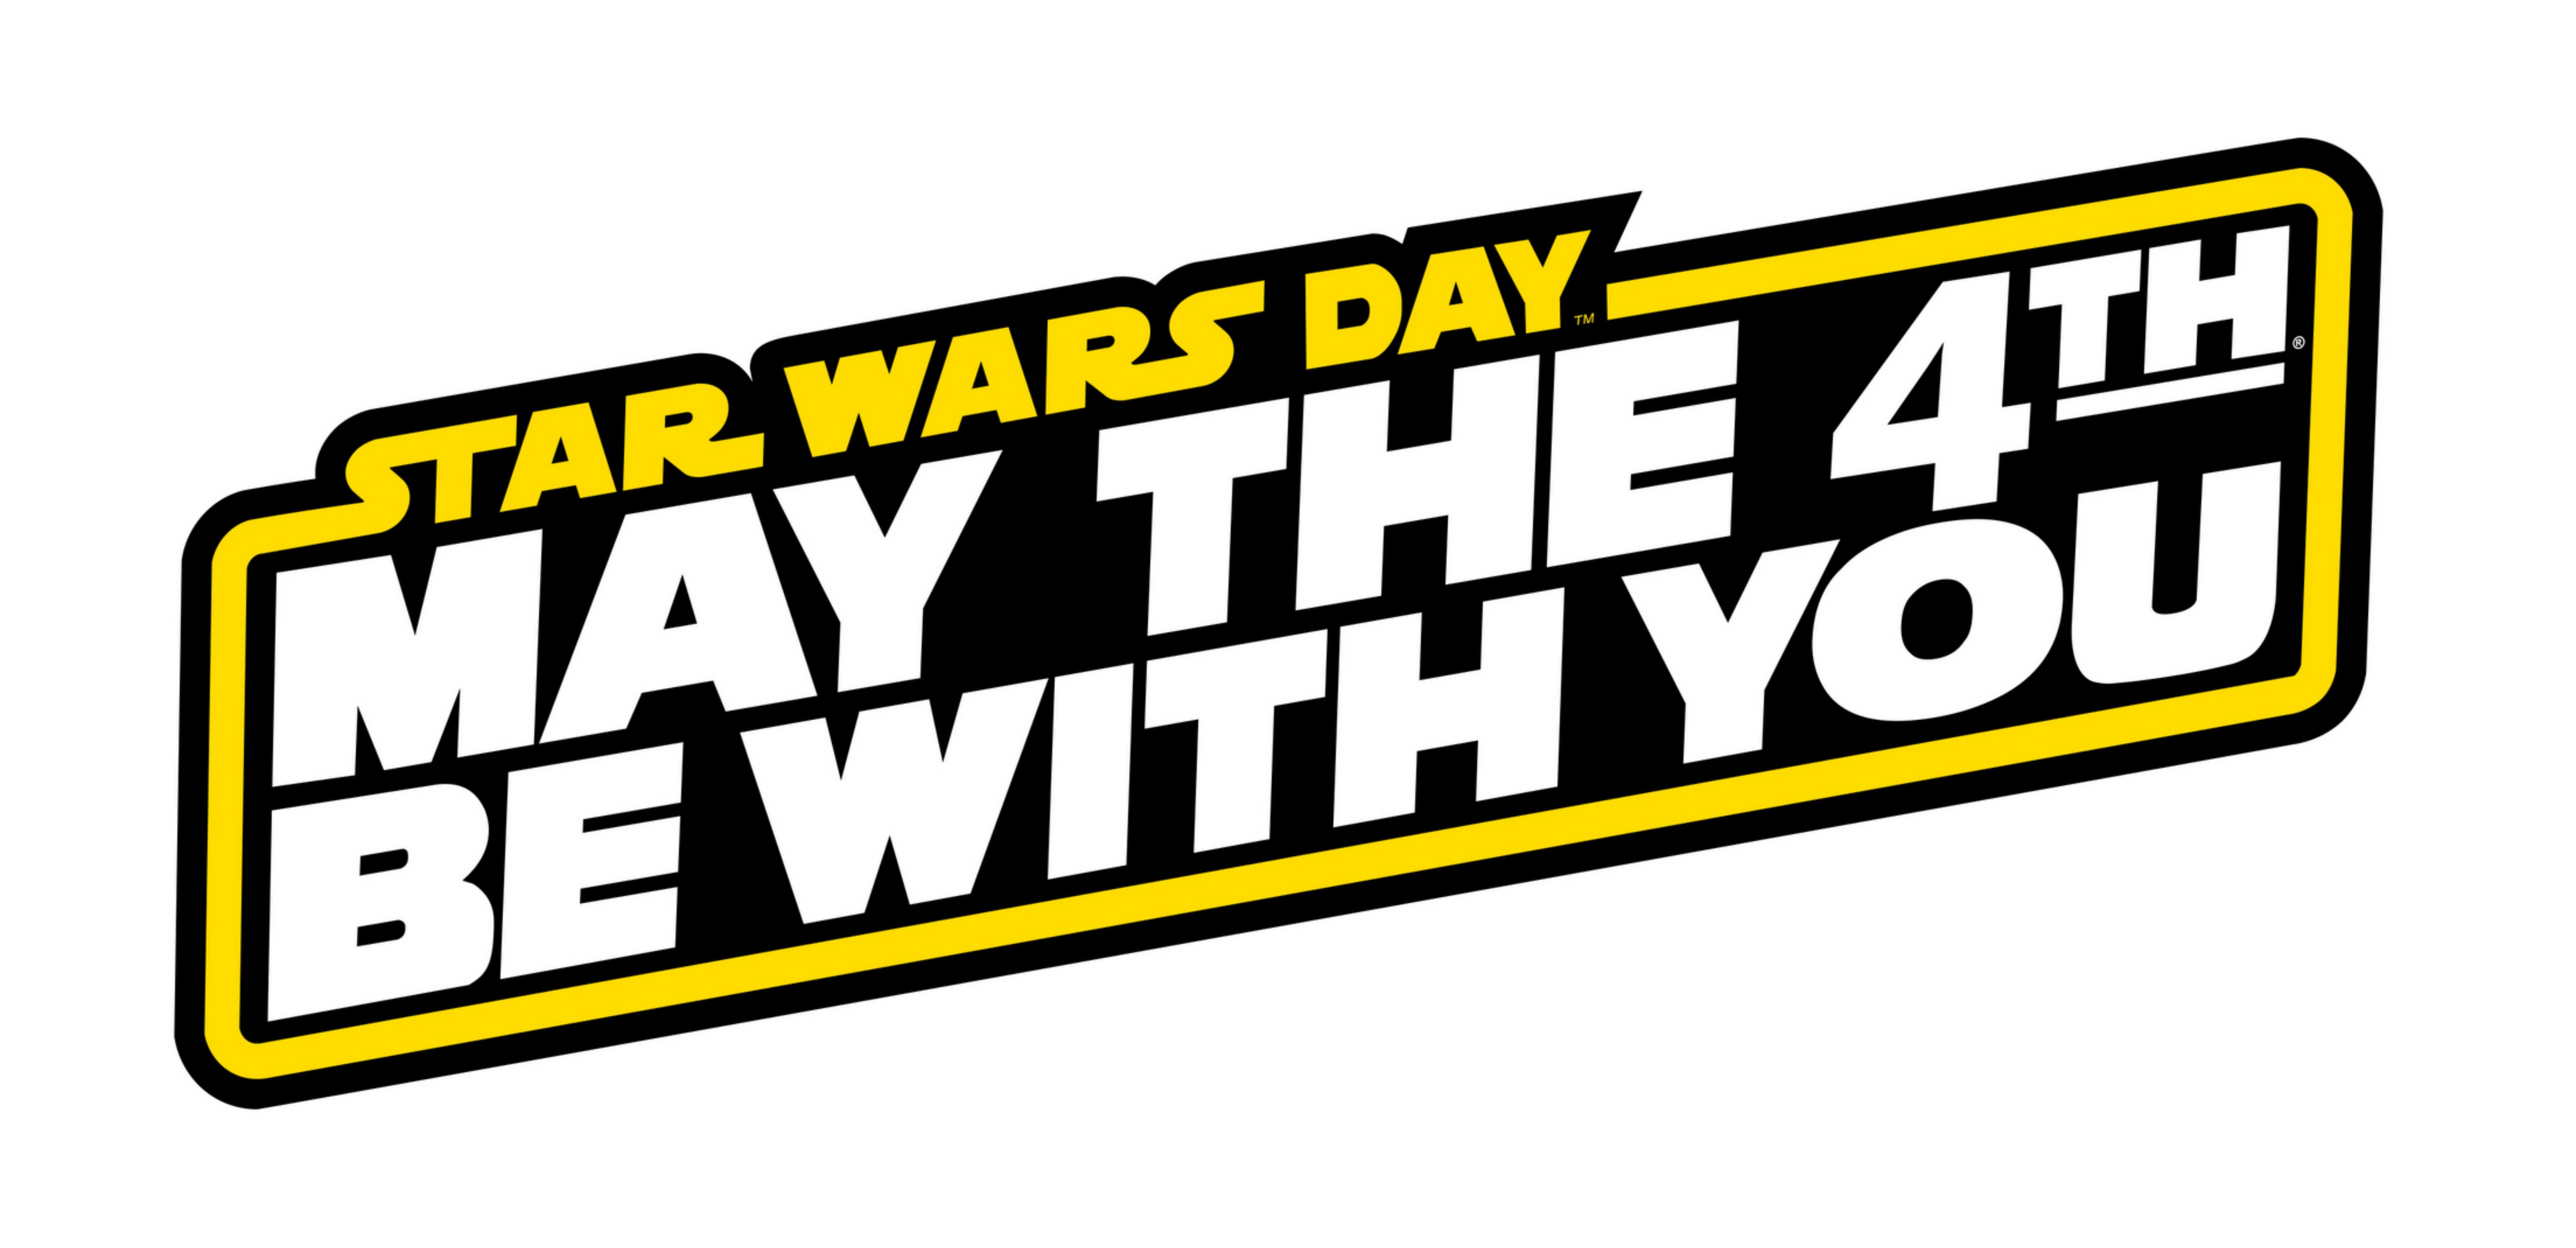 Celebrate Star Wars Day today with deals in the Windows Store